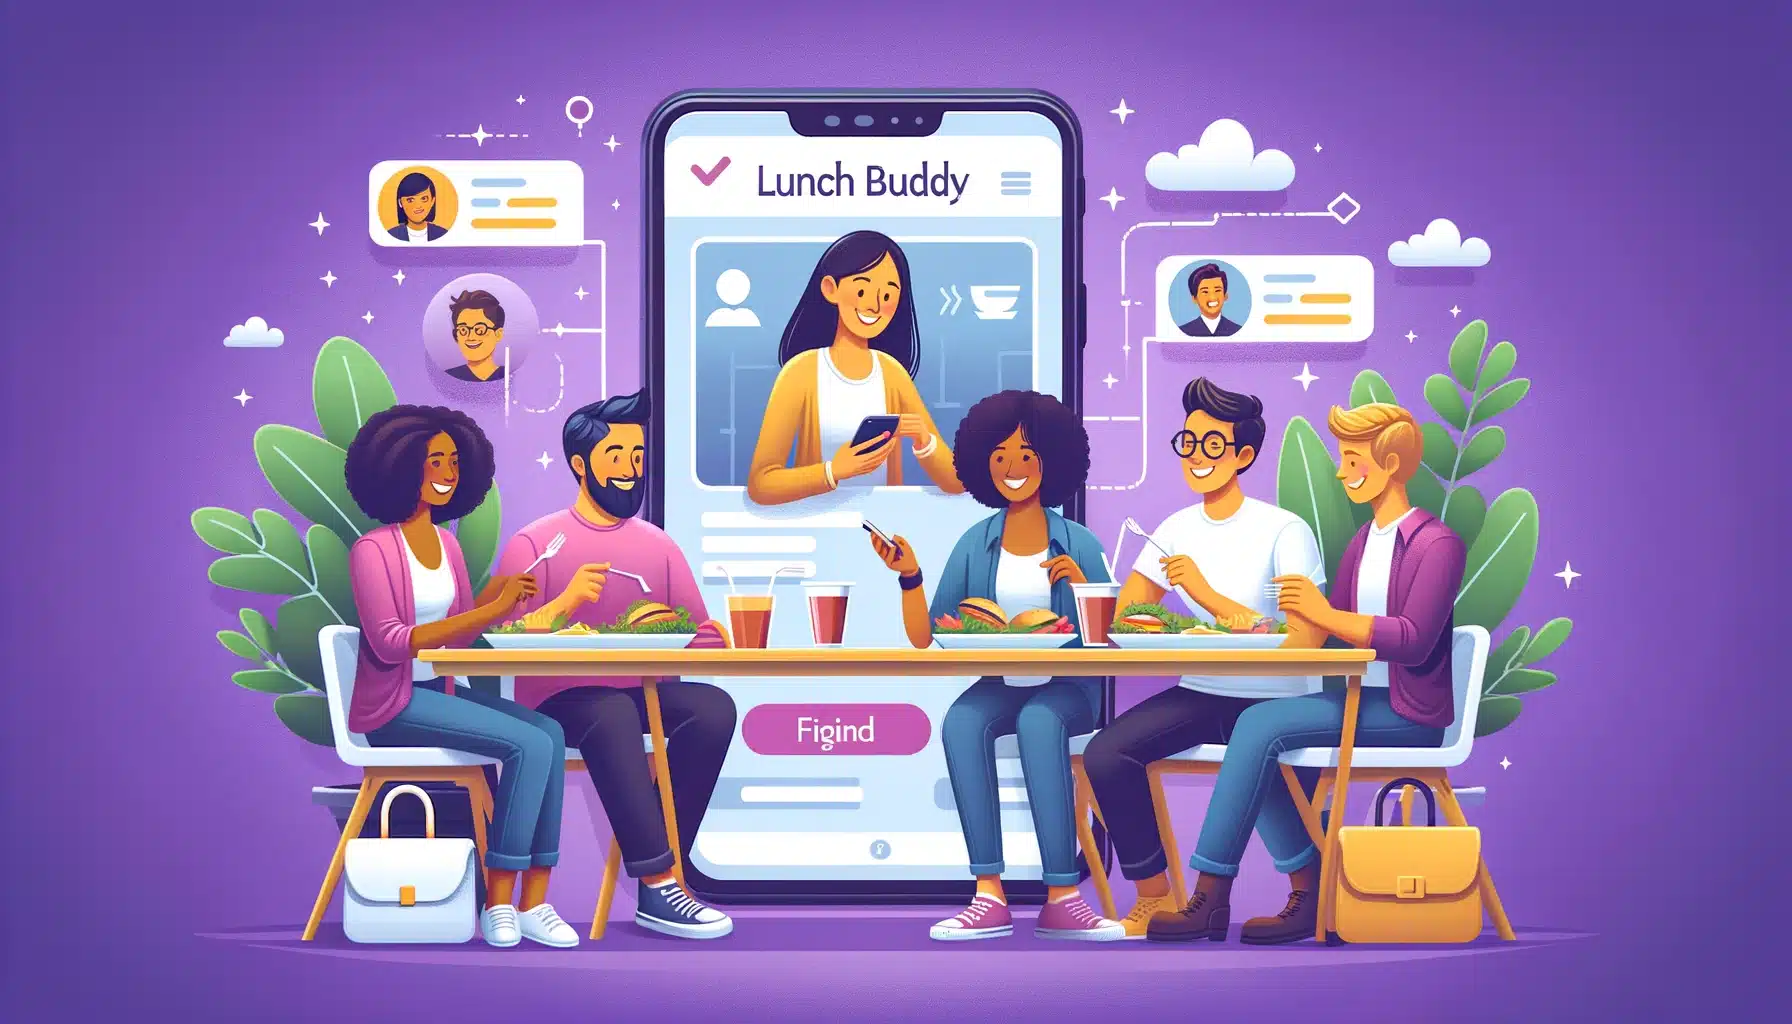 Building-Your-Lunch-Buddy-Network-A-16_9-image-with-a-purple-background-featuring-a-friendly-and-inviting-lunch-scene.-The-image-includes-diverse-individuals-sitting-together-at-a-mode